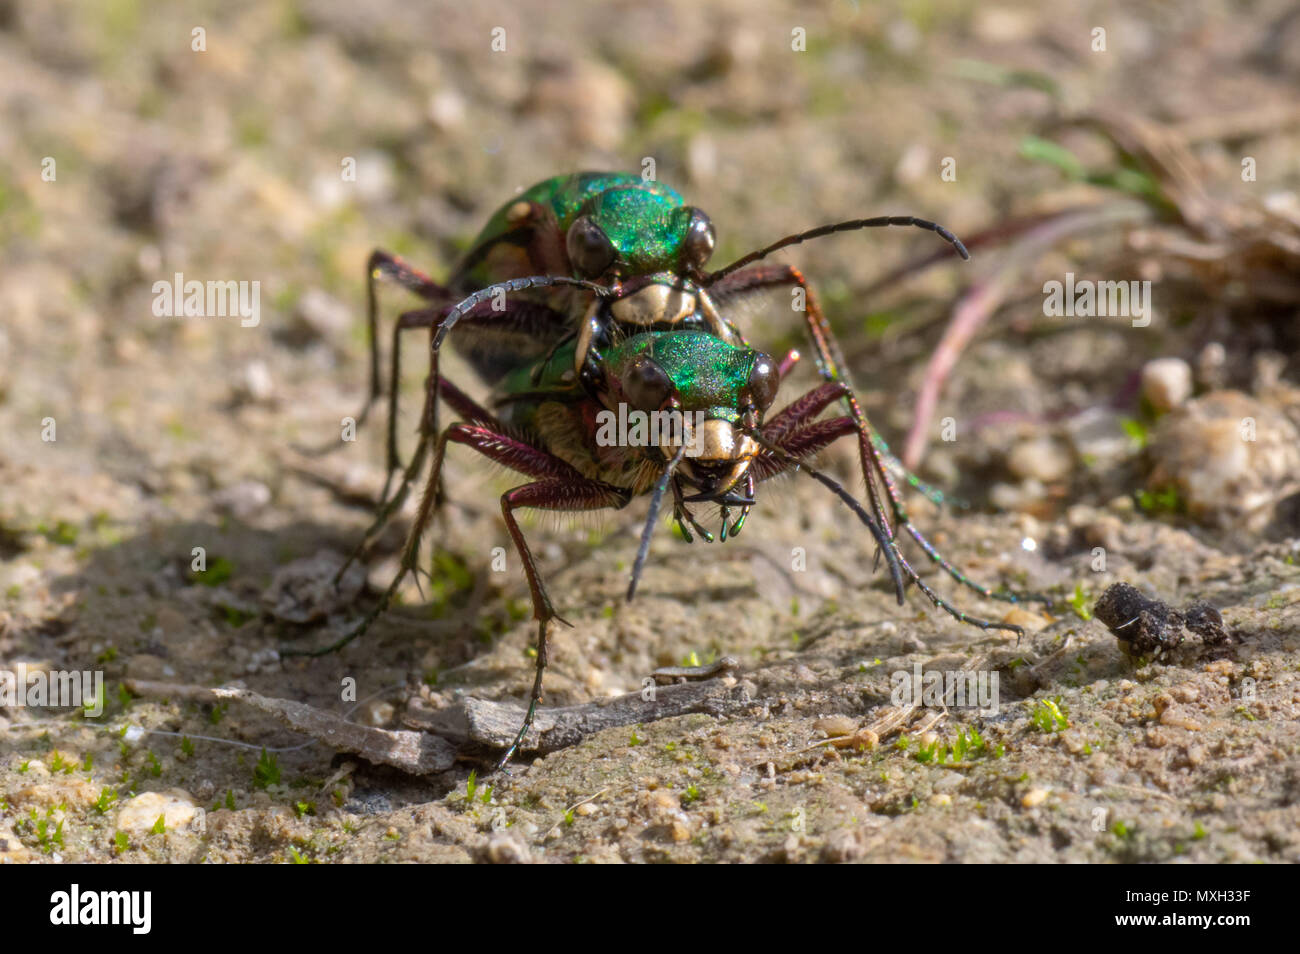 Green tiger beetles (Cicindela campestris) mating. Insects in the family Carabidae in cop, showing metallic colouring and impressive mandibles Stock Photo